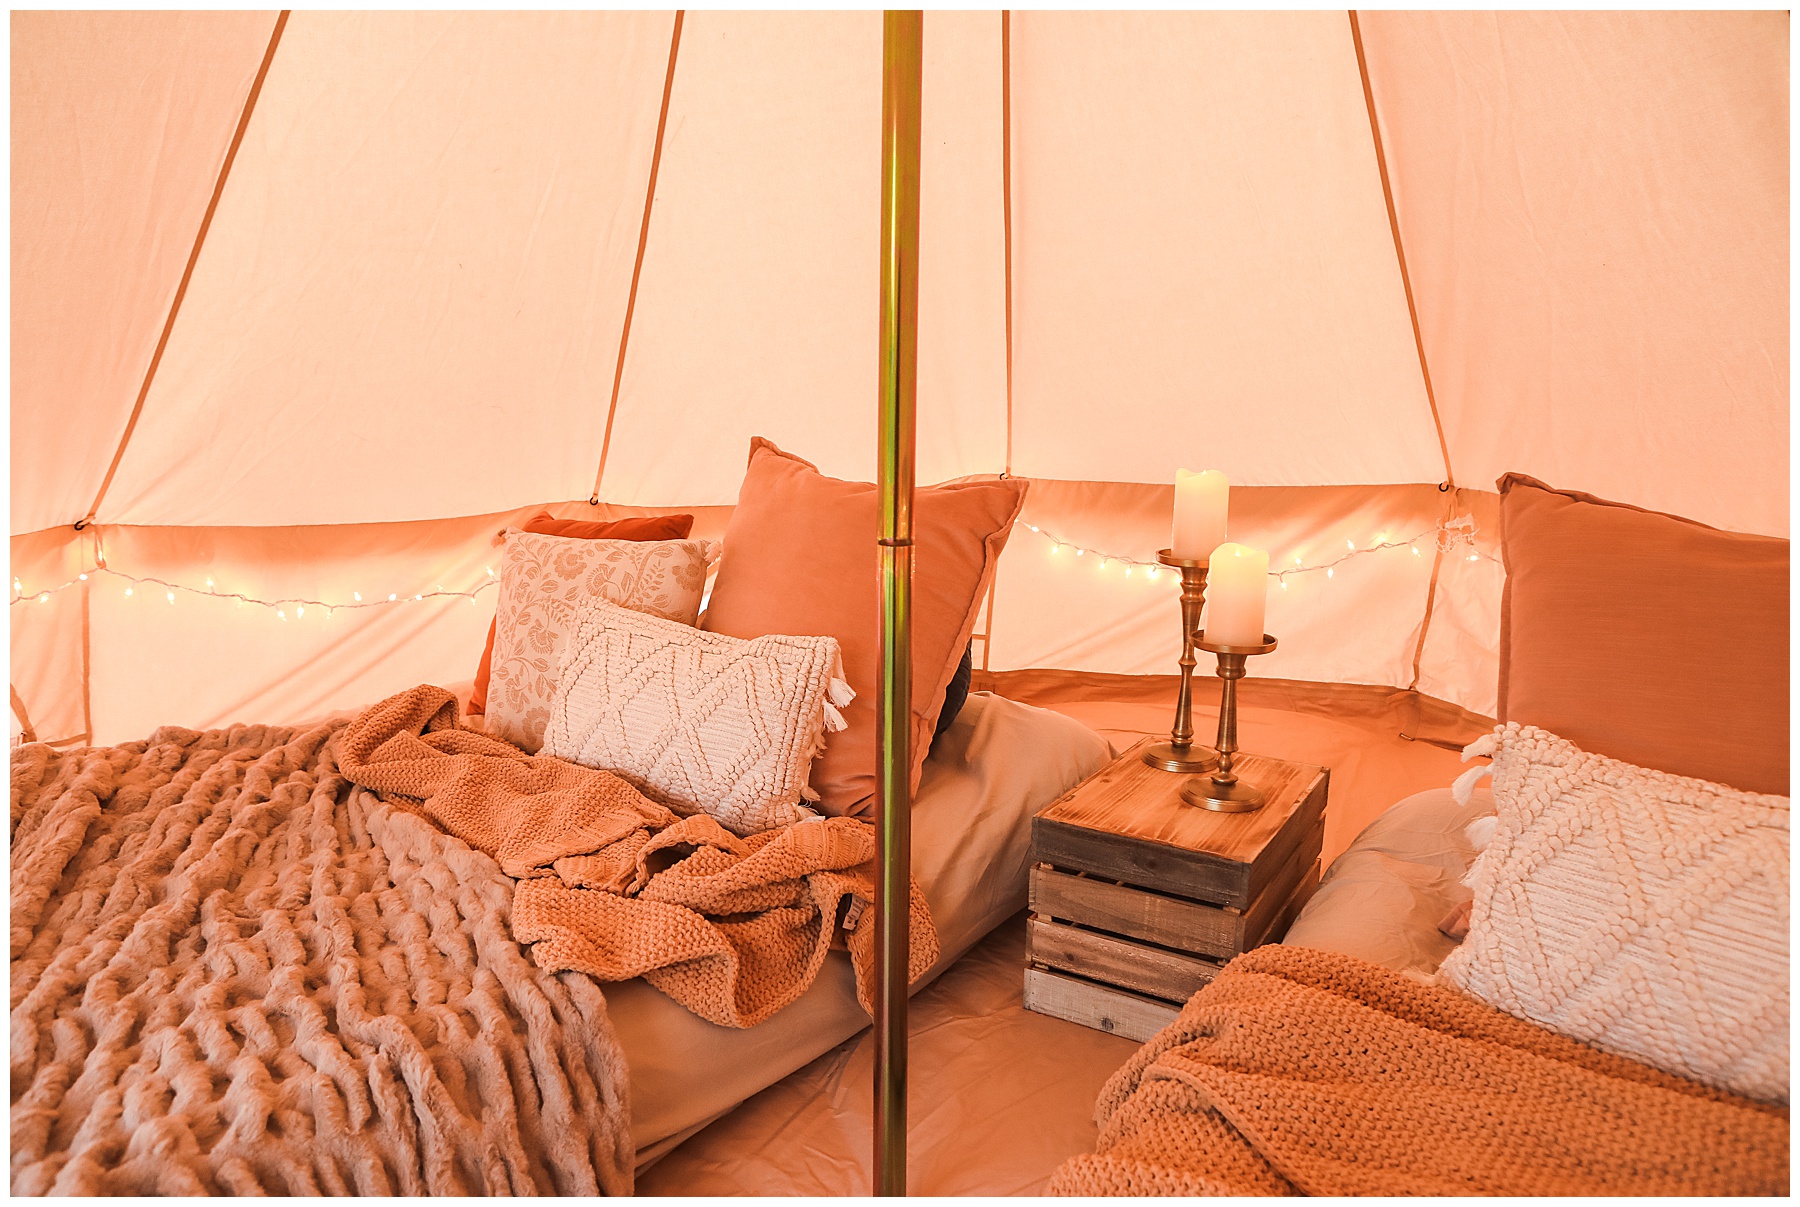 Beds in tent